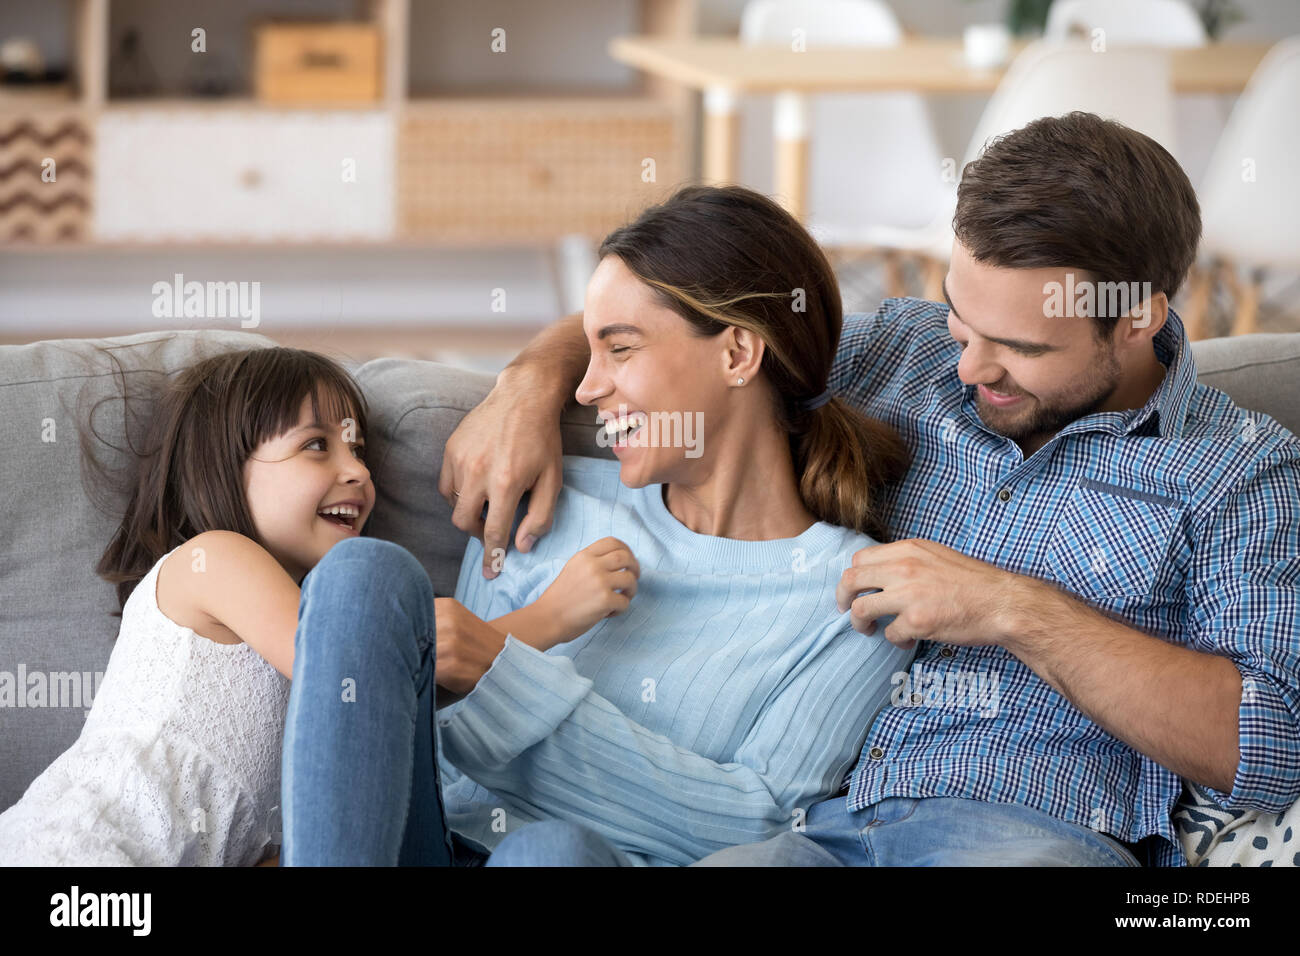 Kid daughter and dad tickling mom having fun playing together Stock Photo